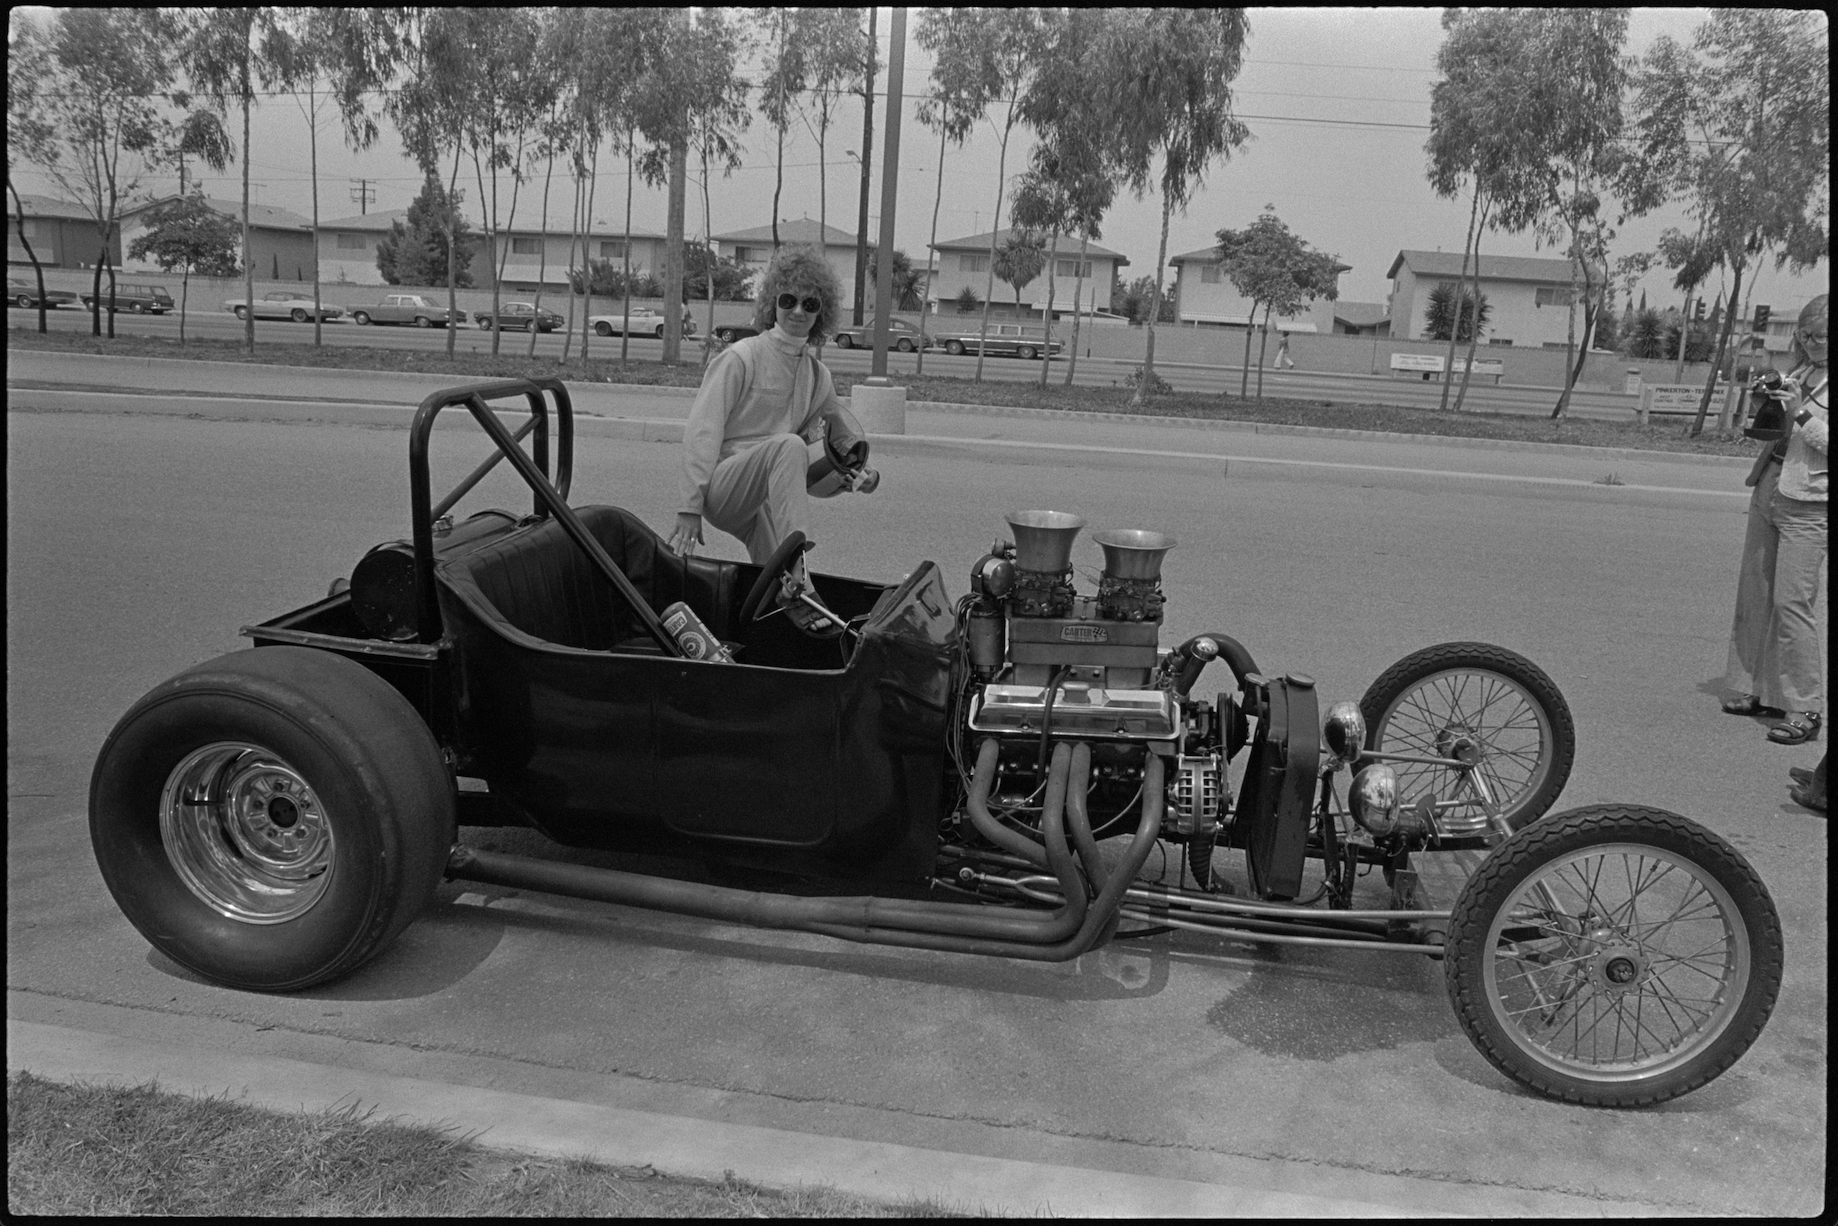 A black-and-white photograph documenting artist Suzanne Lacy's performance "Cinderella in a Dragster" (1976). The artist is stepping into a vintage dragster, wearing sunglasses, a racing jumpsuit, and holding a racing helmet. The vehicle is parked on an empty tree-lined road in California. On the right, a person is taking a photo of Lacy with a small, analog camera.